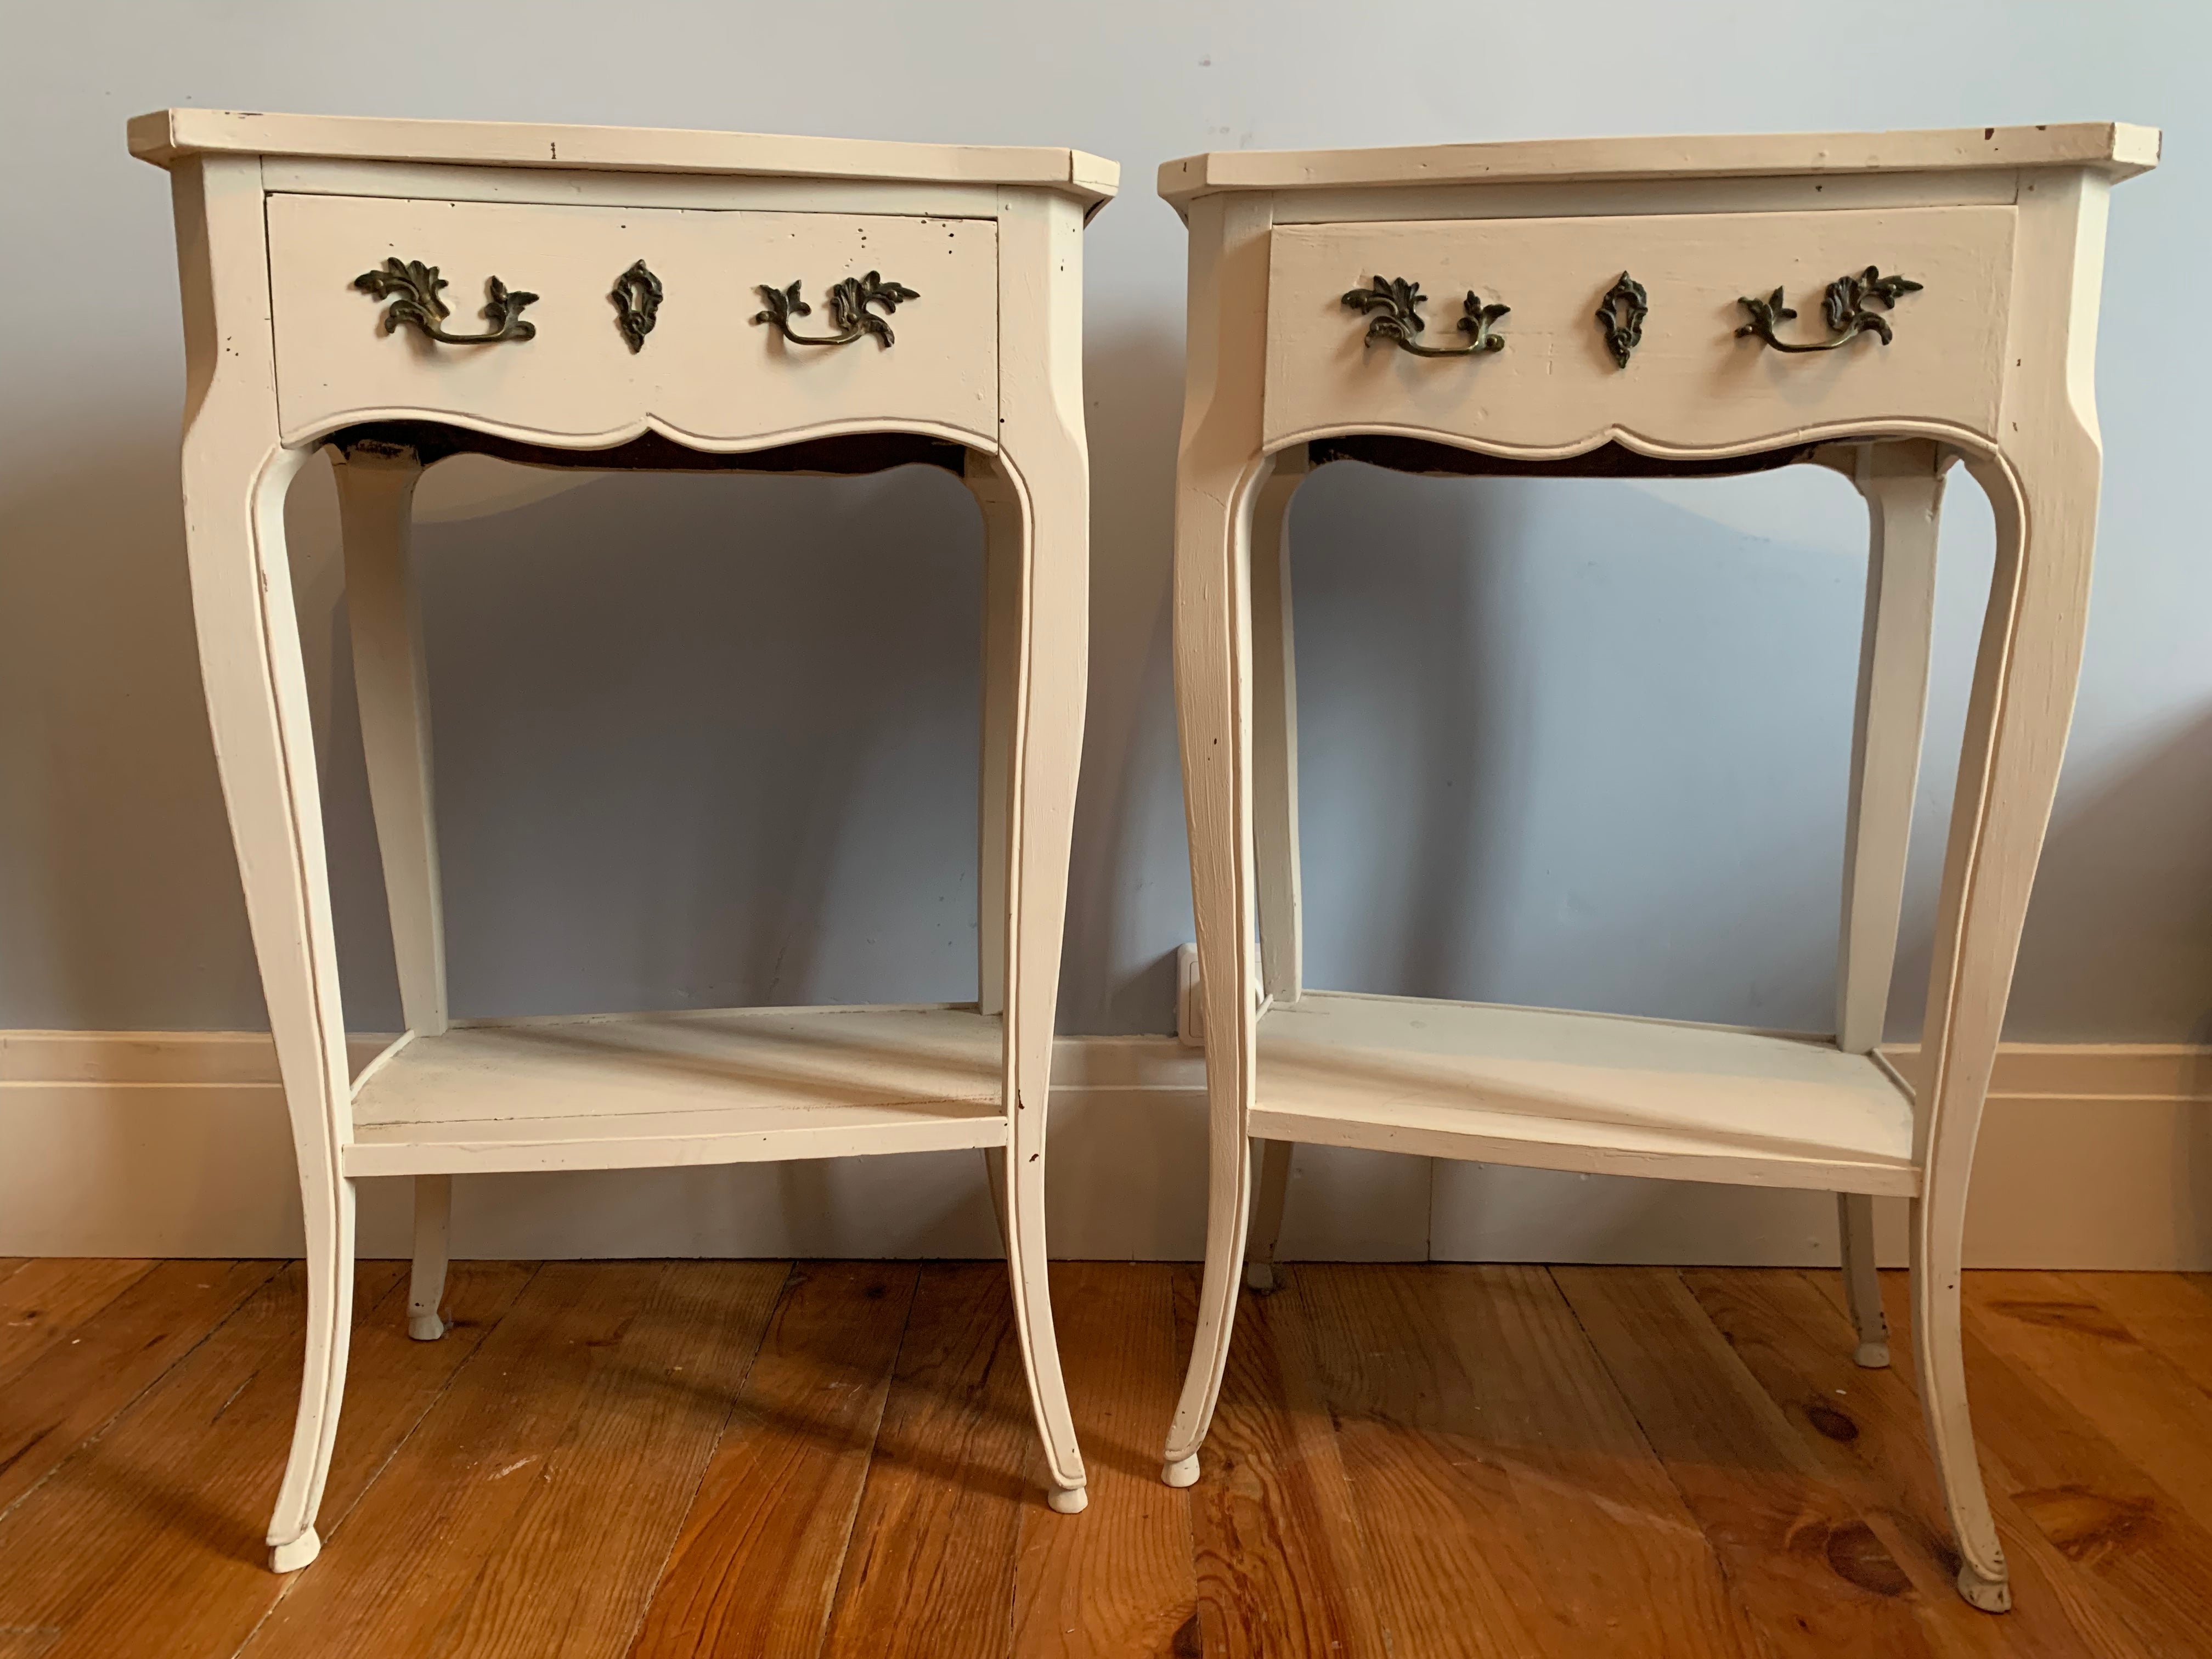 Charming pair of bedside table of Louis XV style. The curved feet bring a certain elegance to this set of furniture in painted wood. These two side tables are each equipped with a drawer with two bronze handles and a false lock. The legs are